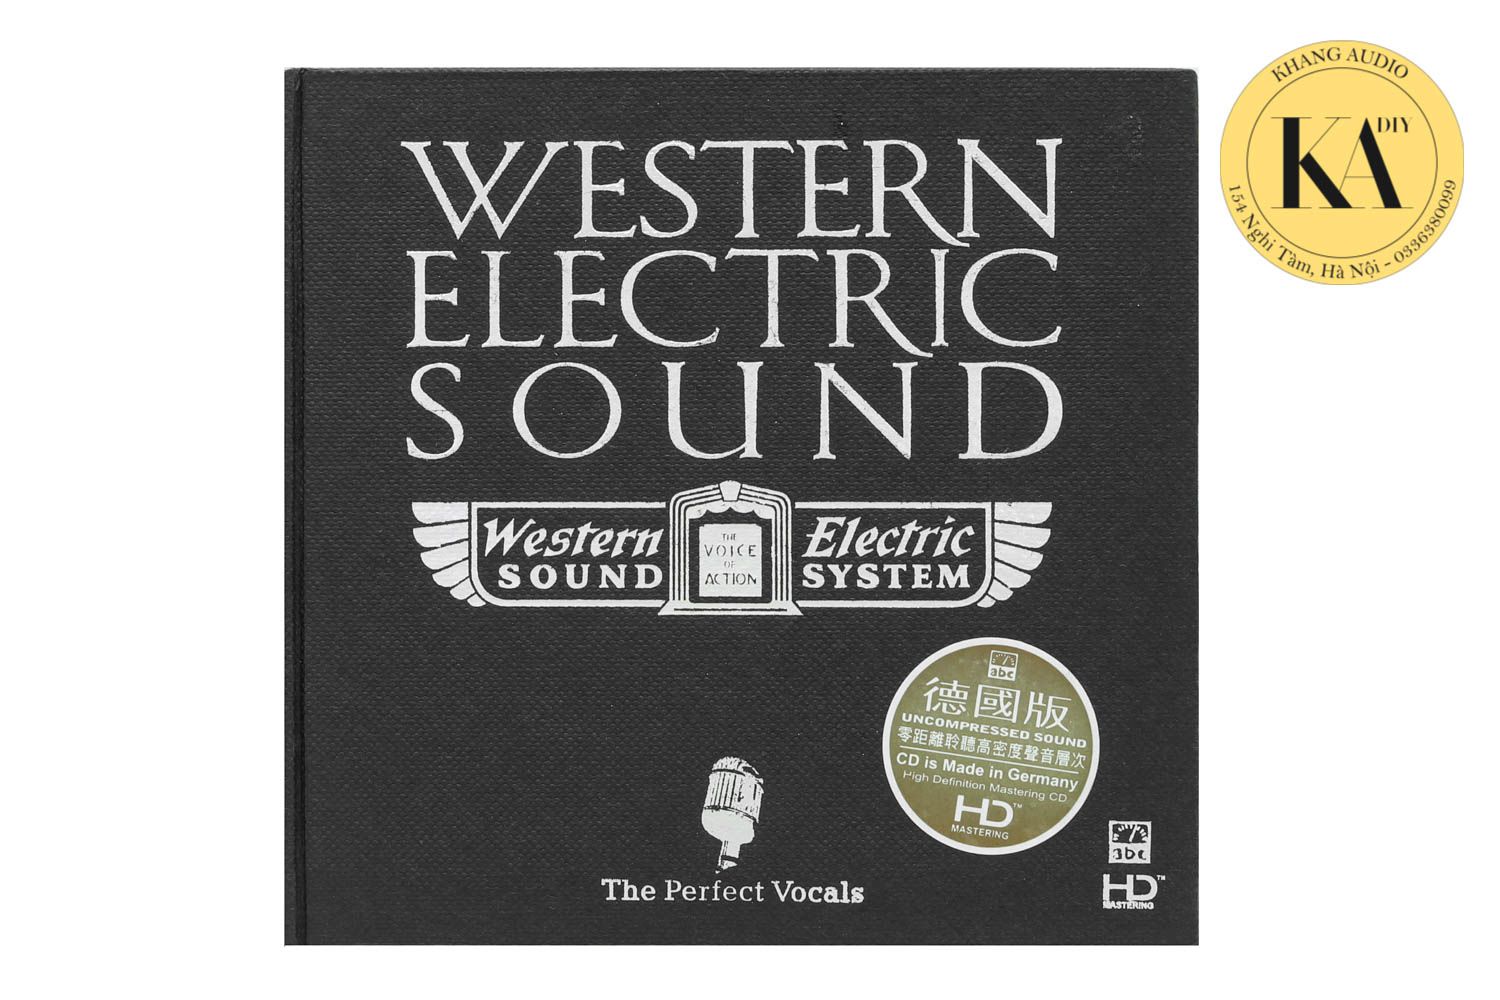 Western Electric Sound - The Perfect Vocals Khang Audio 0336380099